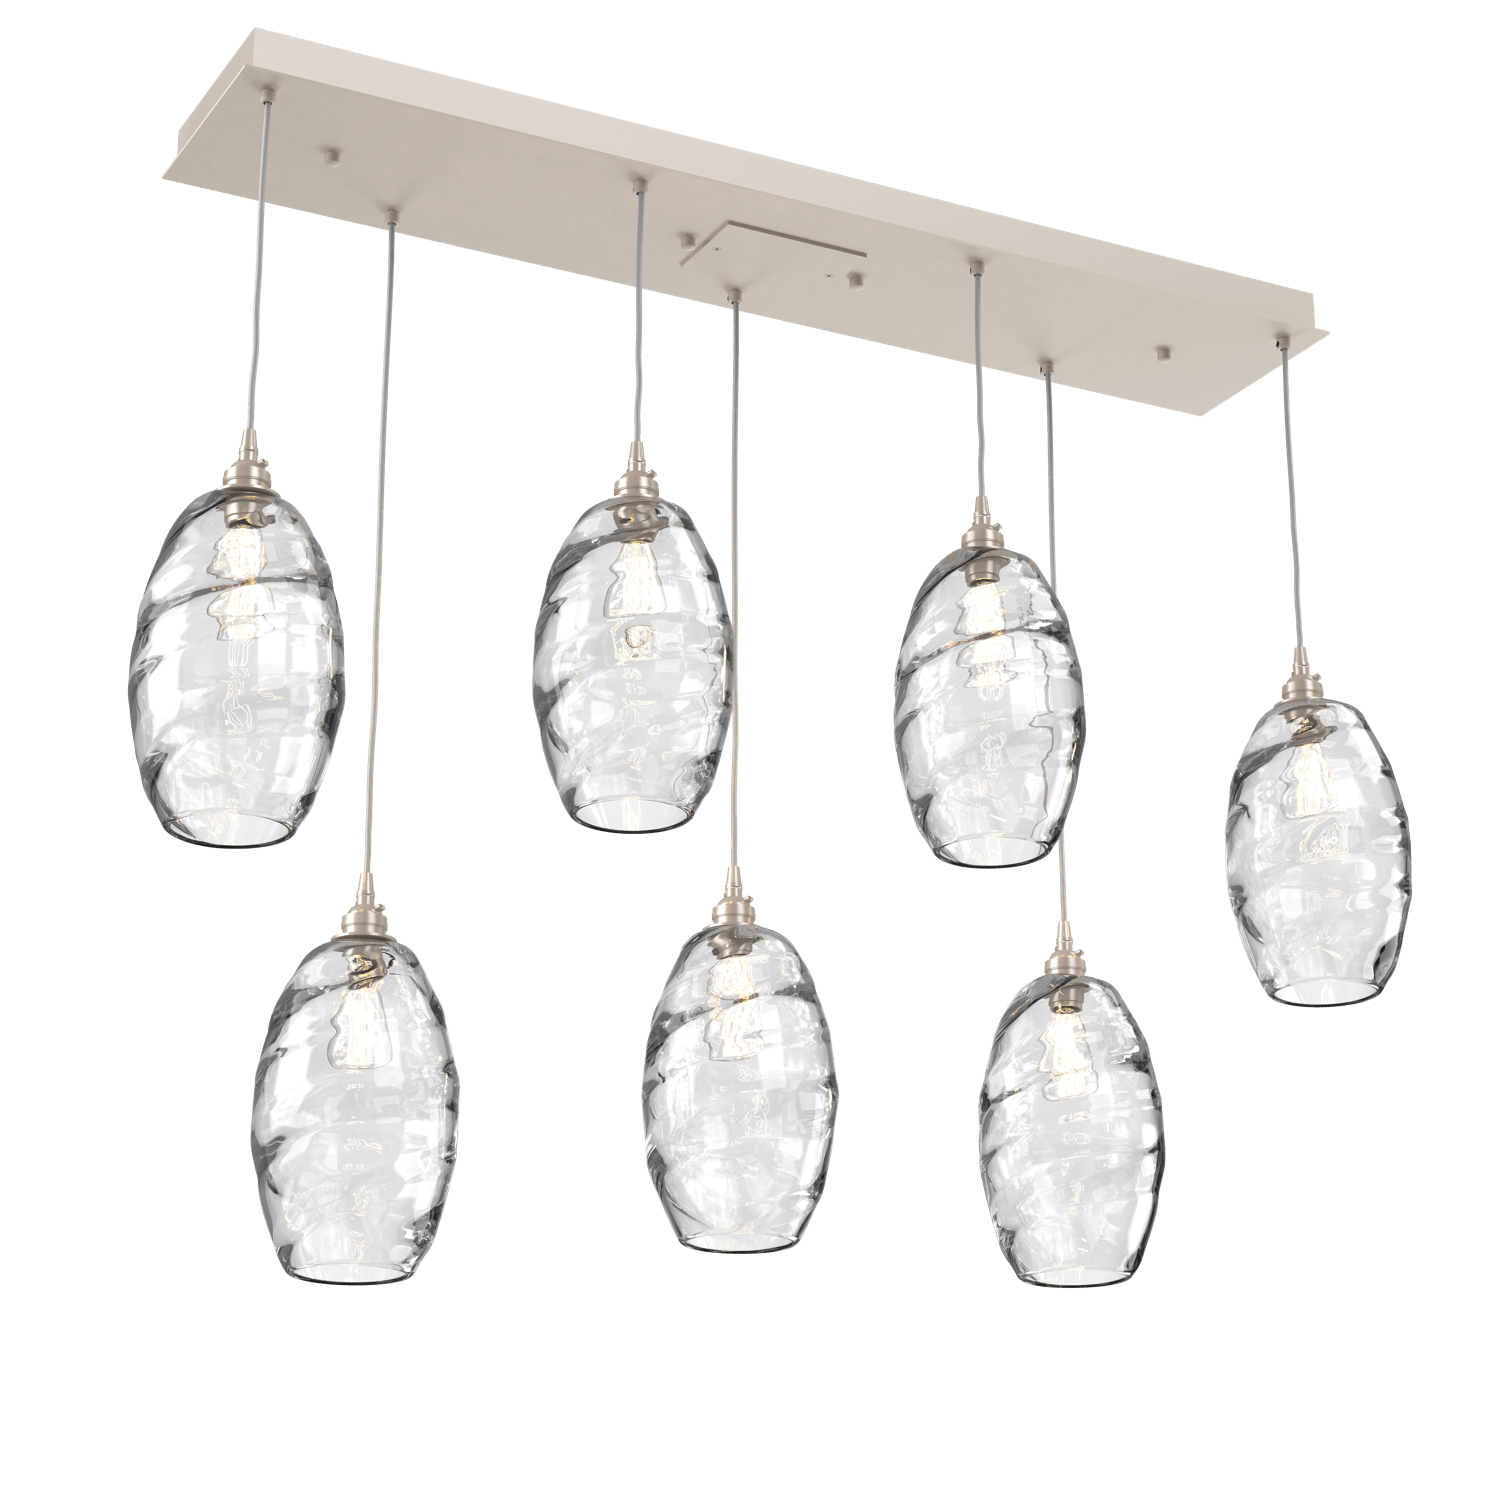 PLB0035-07-BS-OC-Hammerton-Studio-Optic-Blown-Glass-Elisse-7-light-linear-pendant-chandelier-with-metallic-beige-silver-finish-and-optic-clear-blown-glass-shades-and-incandescent-lamping